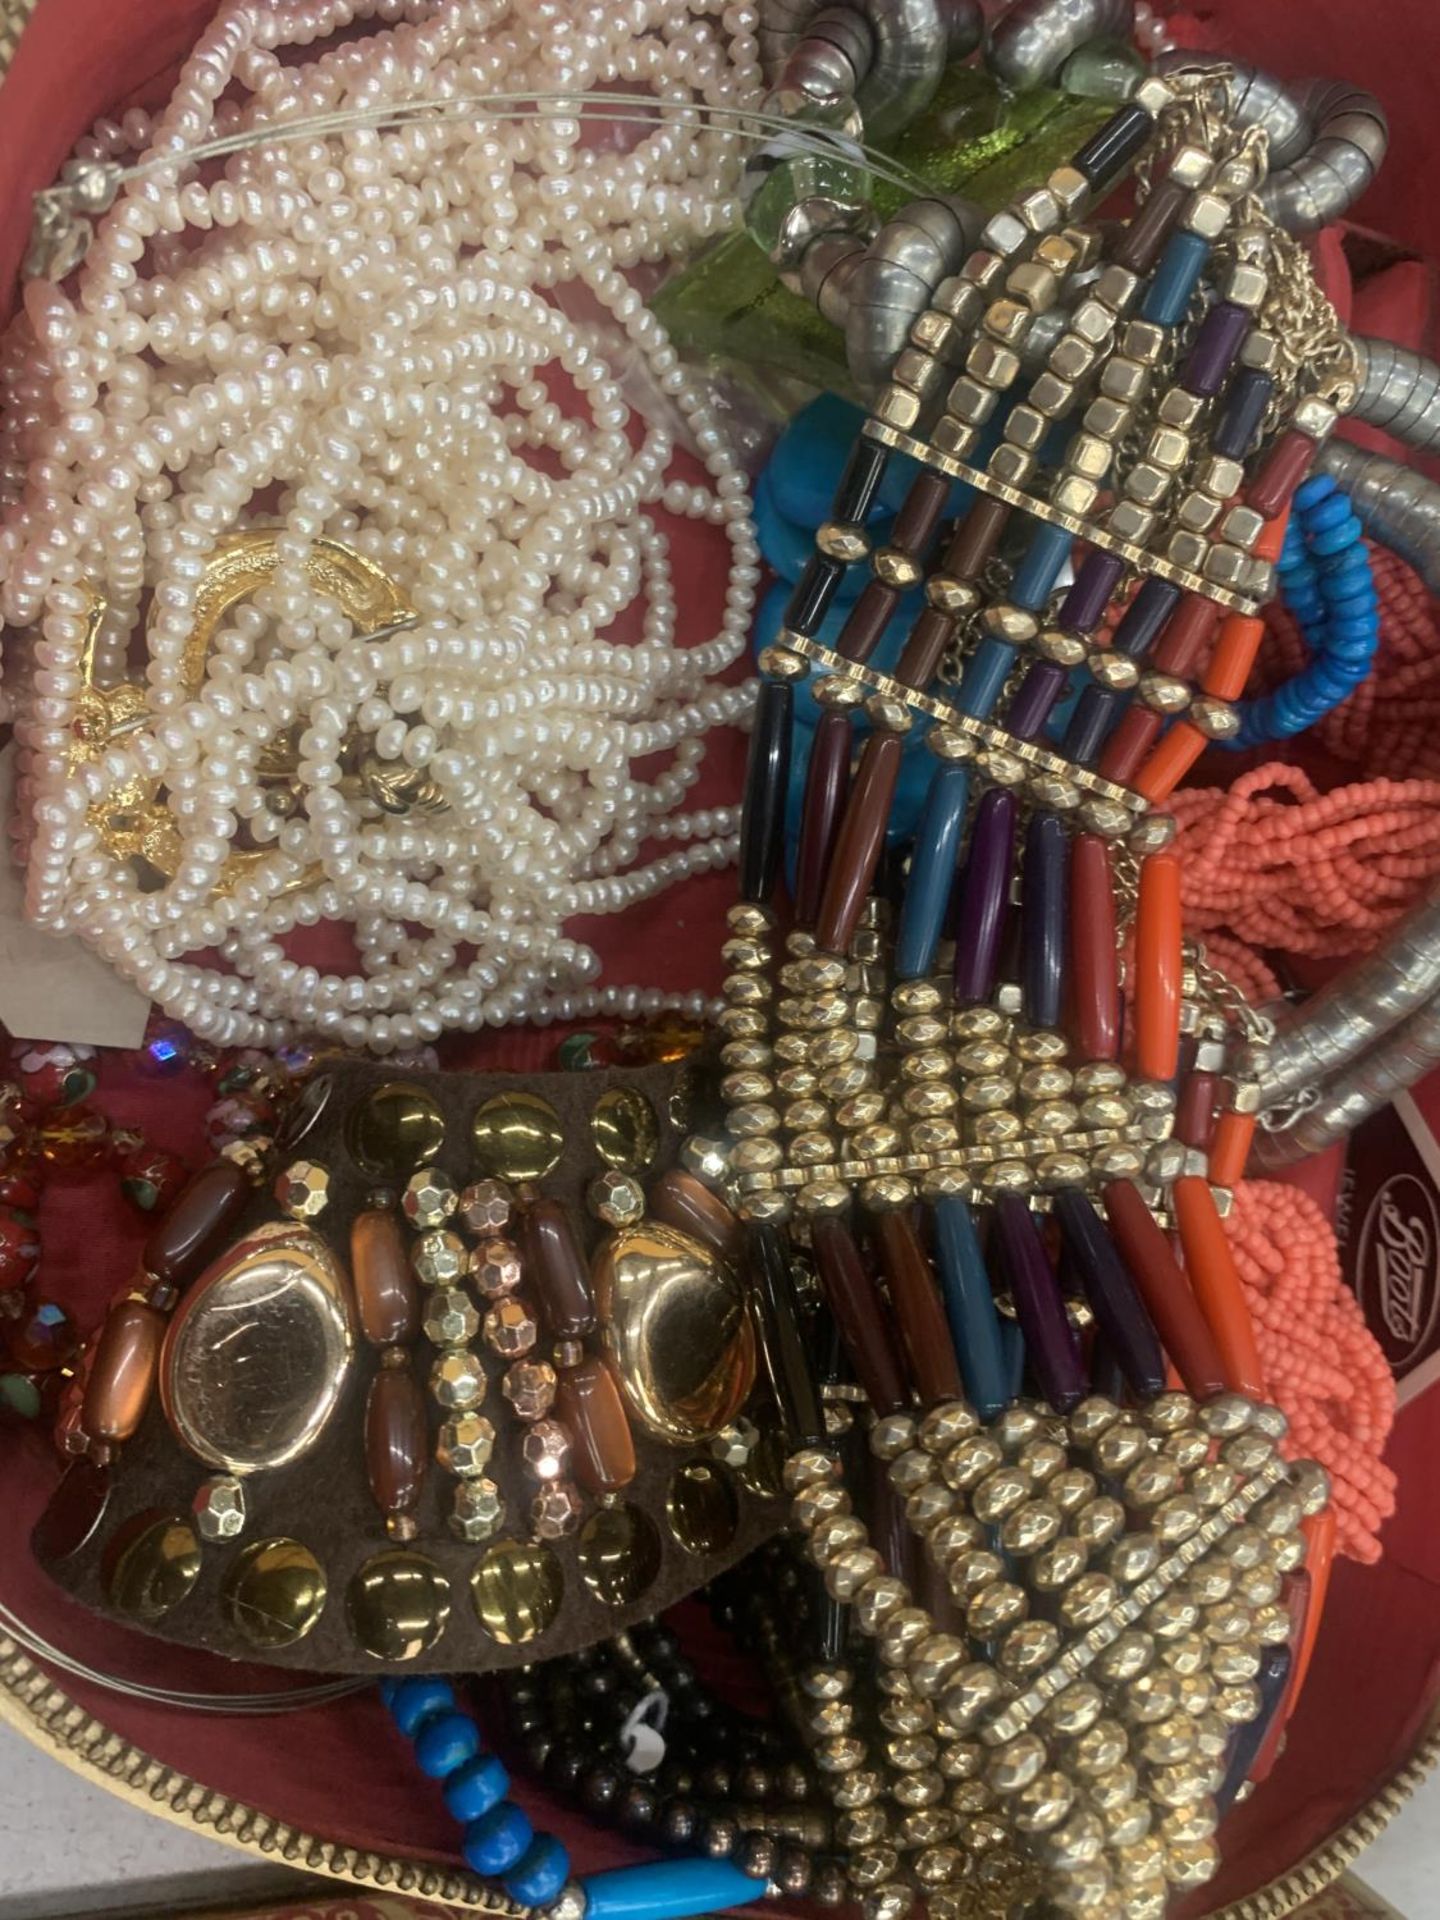 A QUANTITY OF VINTAGE COSTUME JEWELLERY TO INCLUDE RINGS, NECKLACES, ETC IN A JEWELLERY CASE - Image 4 of 4